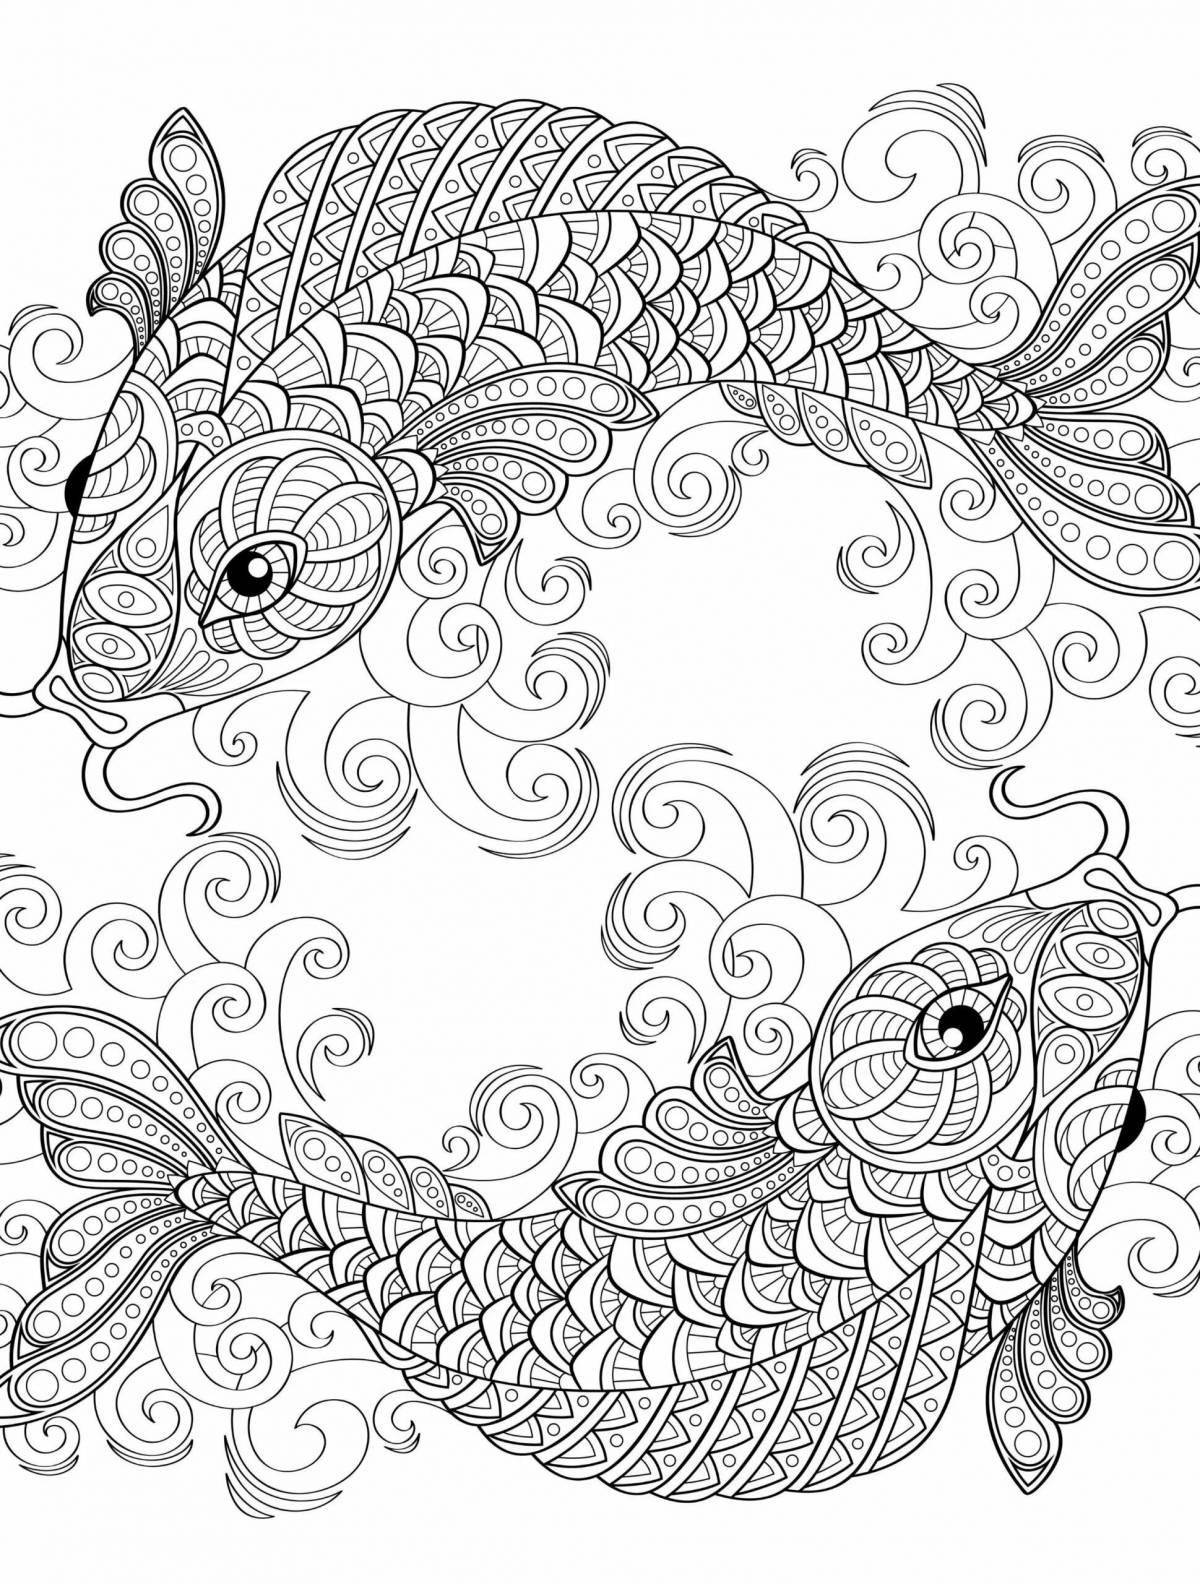 Calming coloring book relaxation